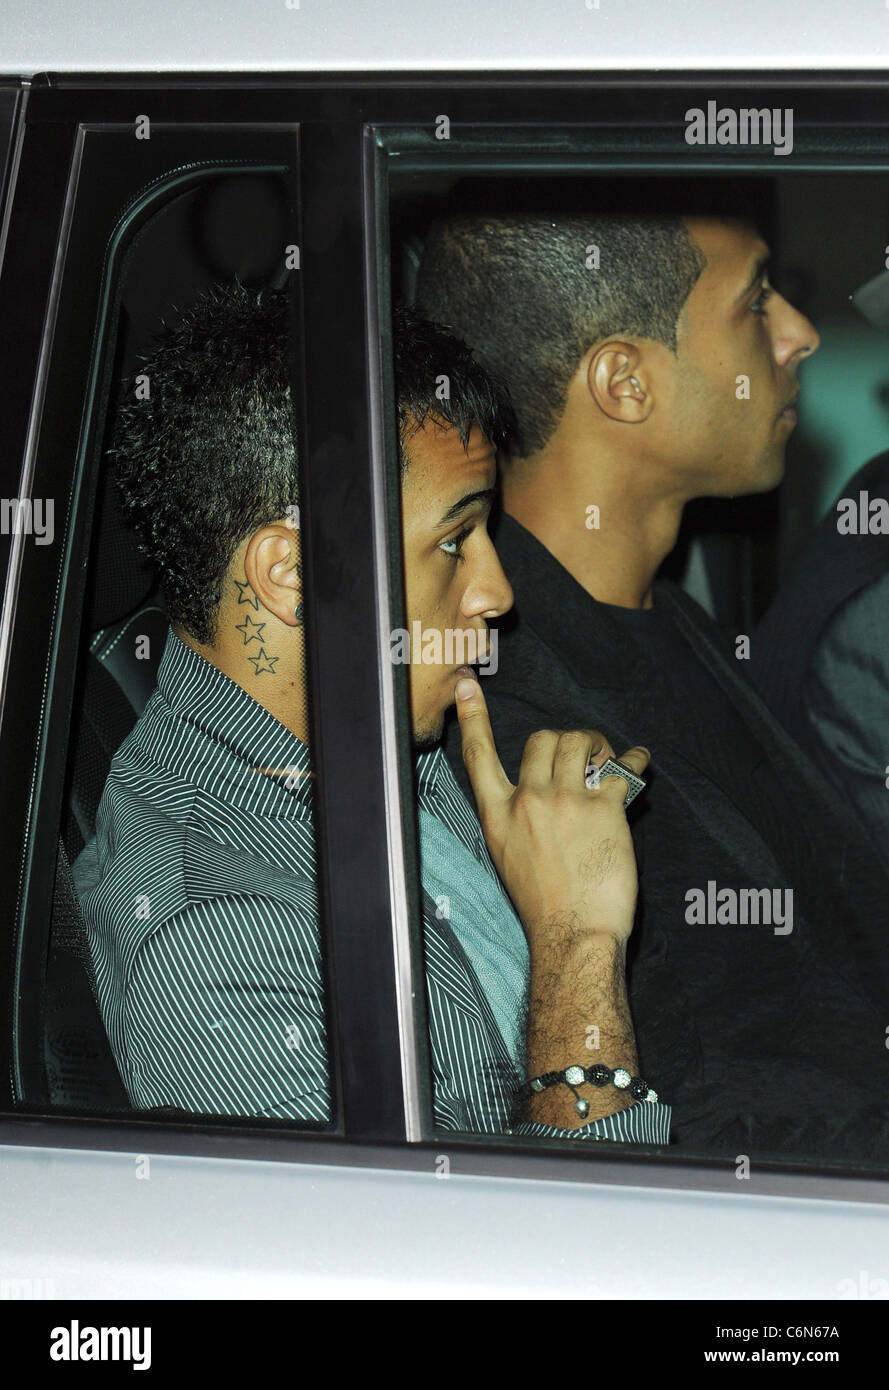 Aston and Marvin of JLS O2 Silver Clef Awards 2010 held at the London Hilton, Park Lane - Arrivals London, England - 02.07.10 Stock Photo